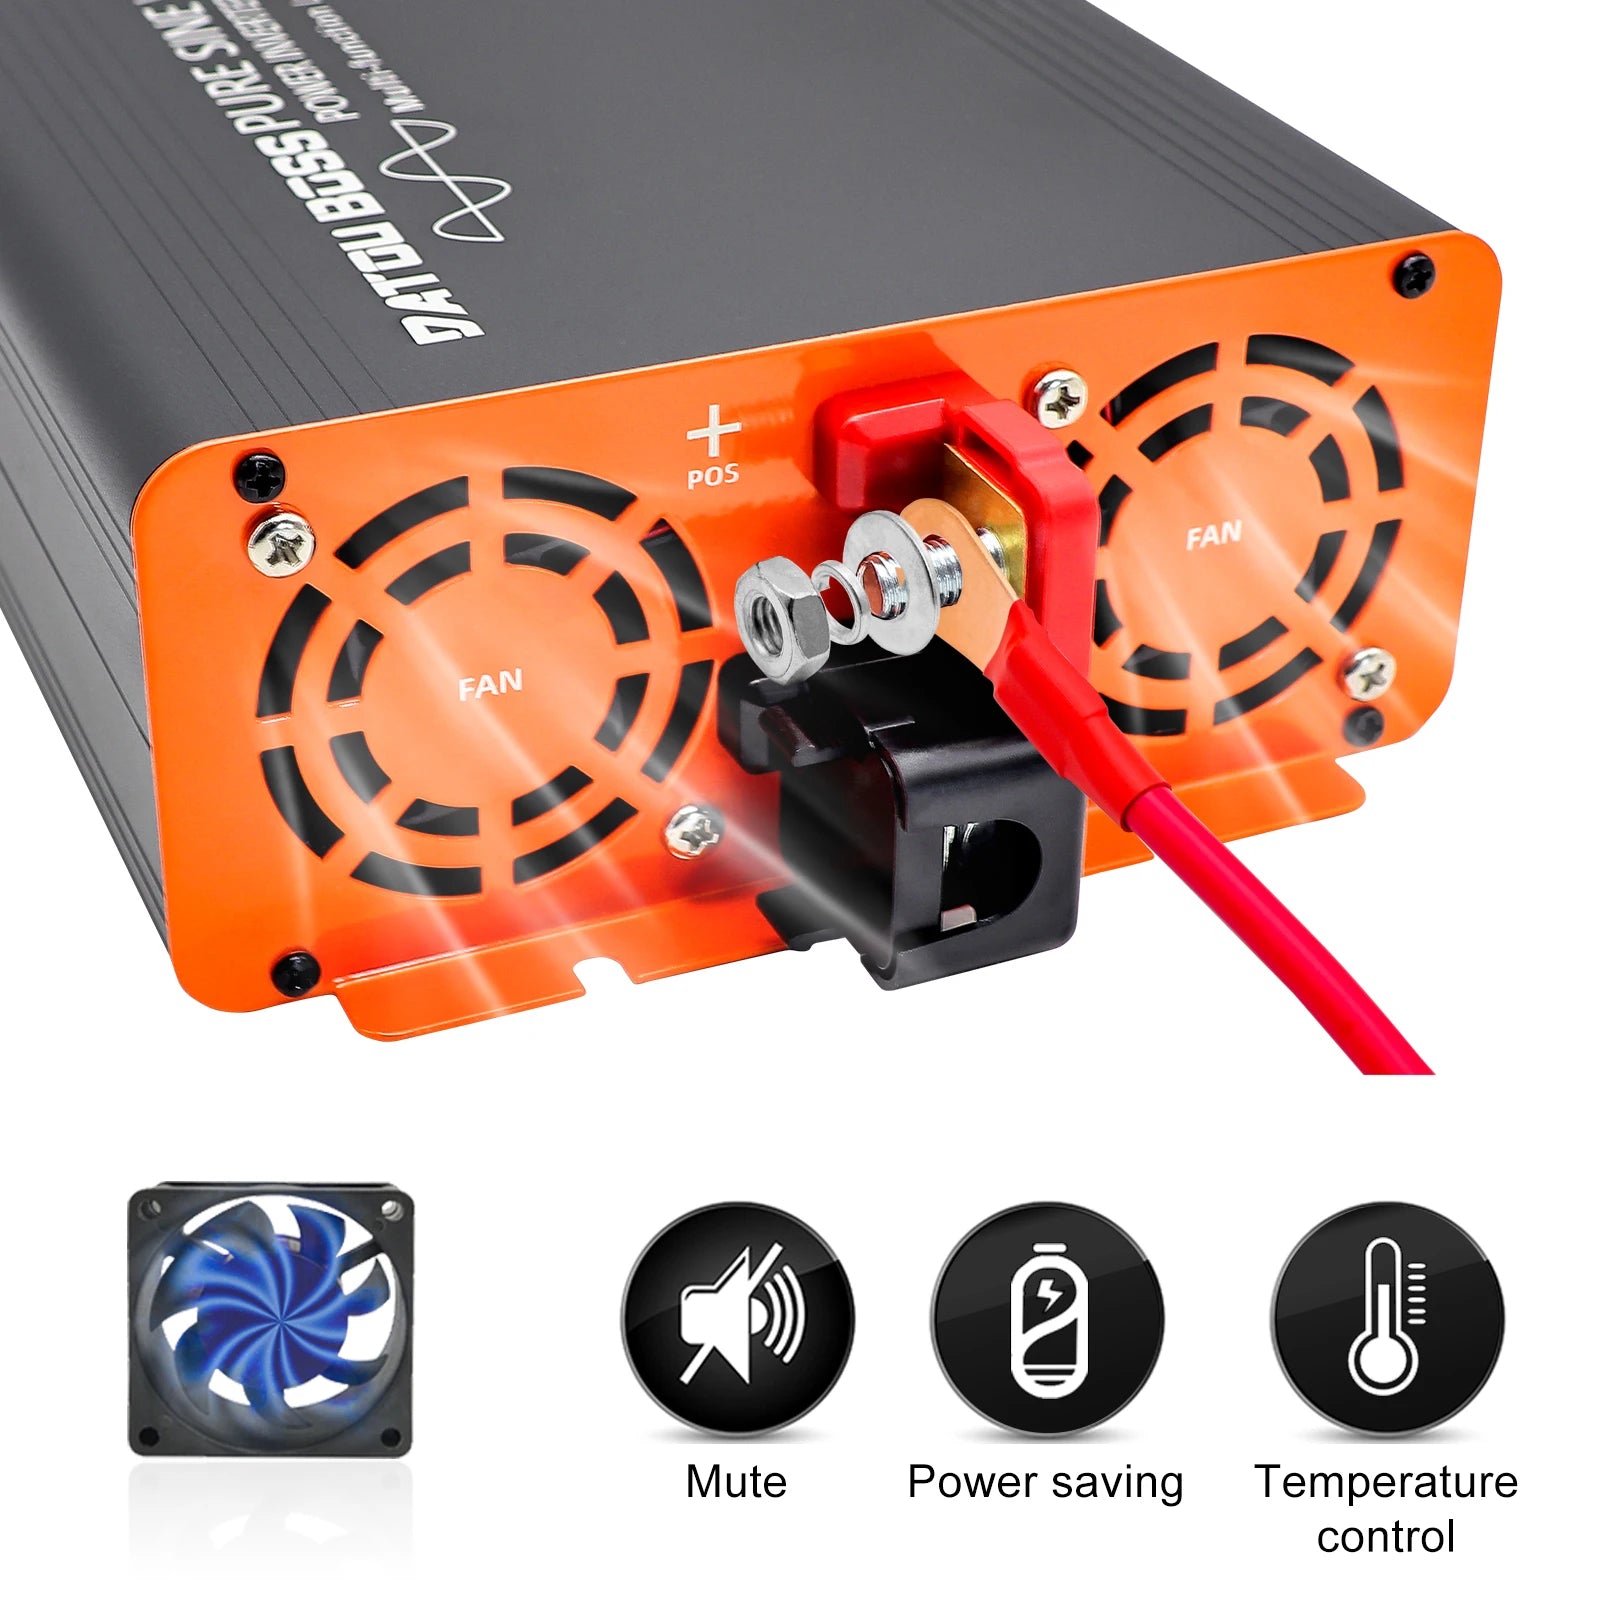 DATOUBOSS Pure Sine Wave Inverter, Lightweight aluminum alloy shell with good thermal conductivity, cooling components efficiently without affecting long-term performance.